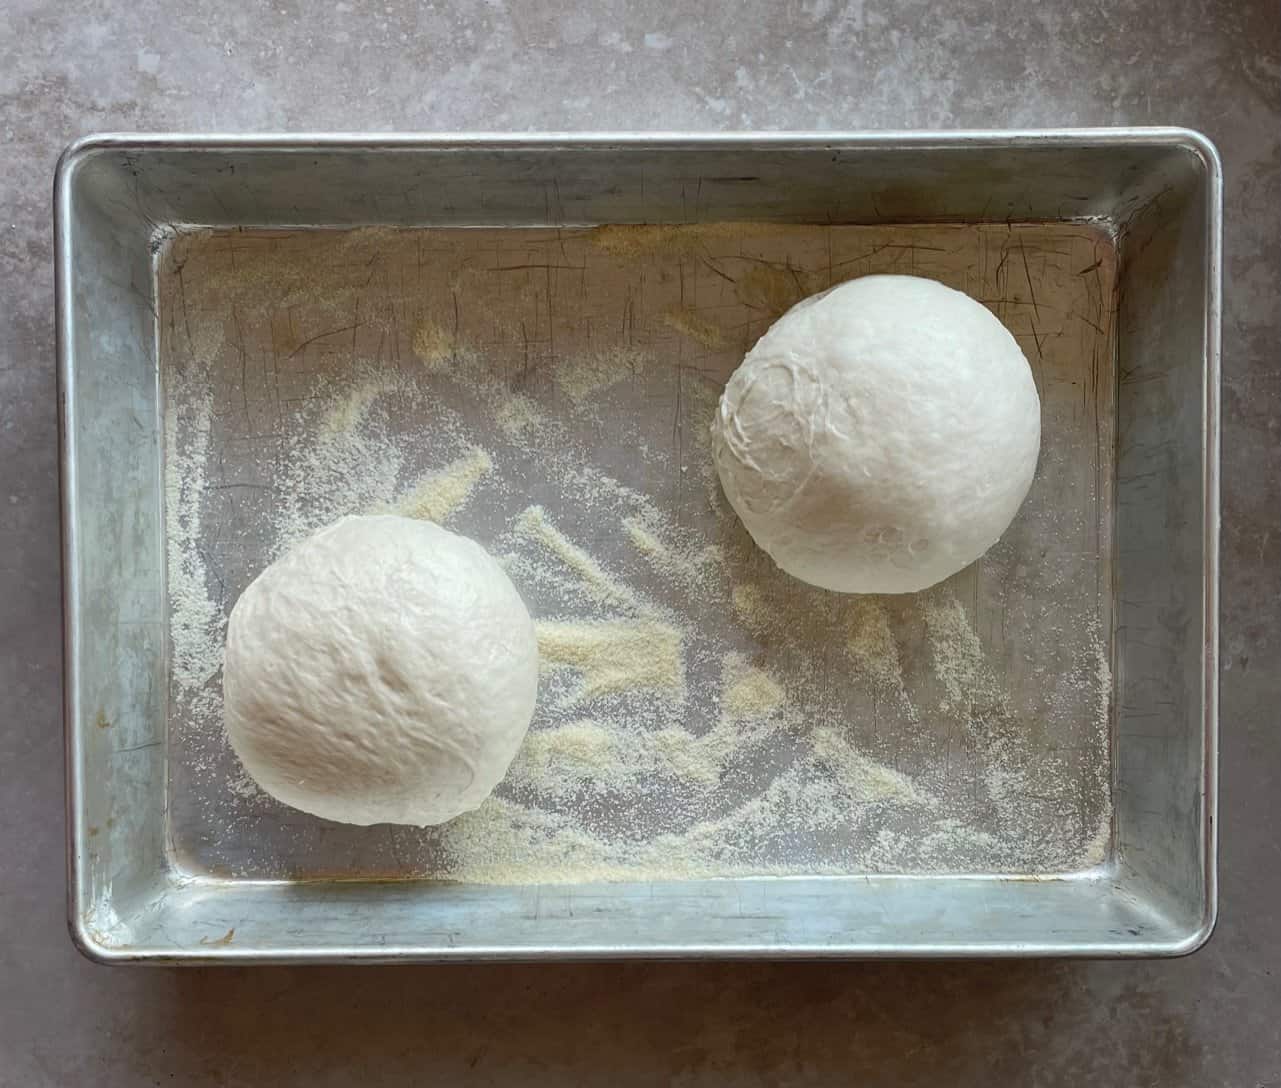 two balls of pizza dough rising in a floured baking pan.